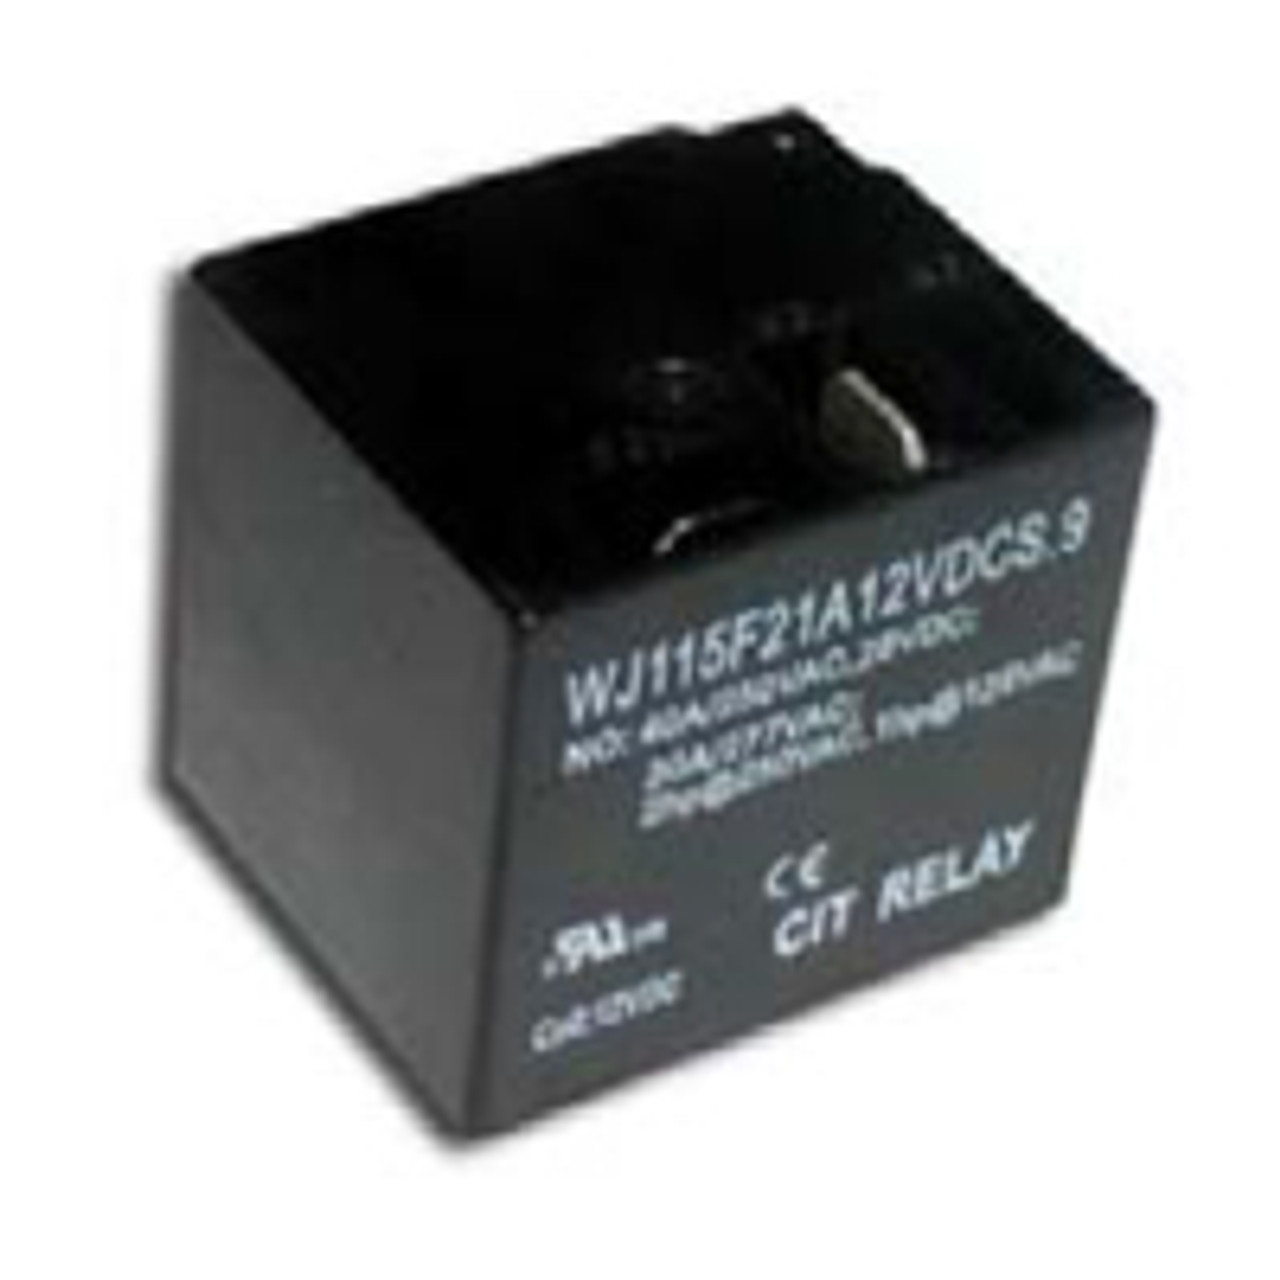 CIT Relay and Switch J115F21A48VDCN.9 Power Relays